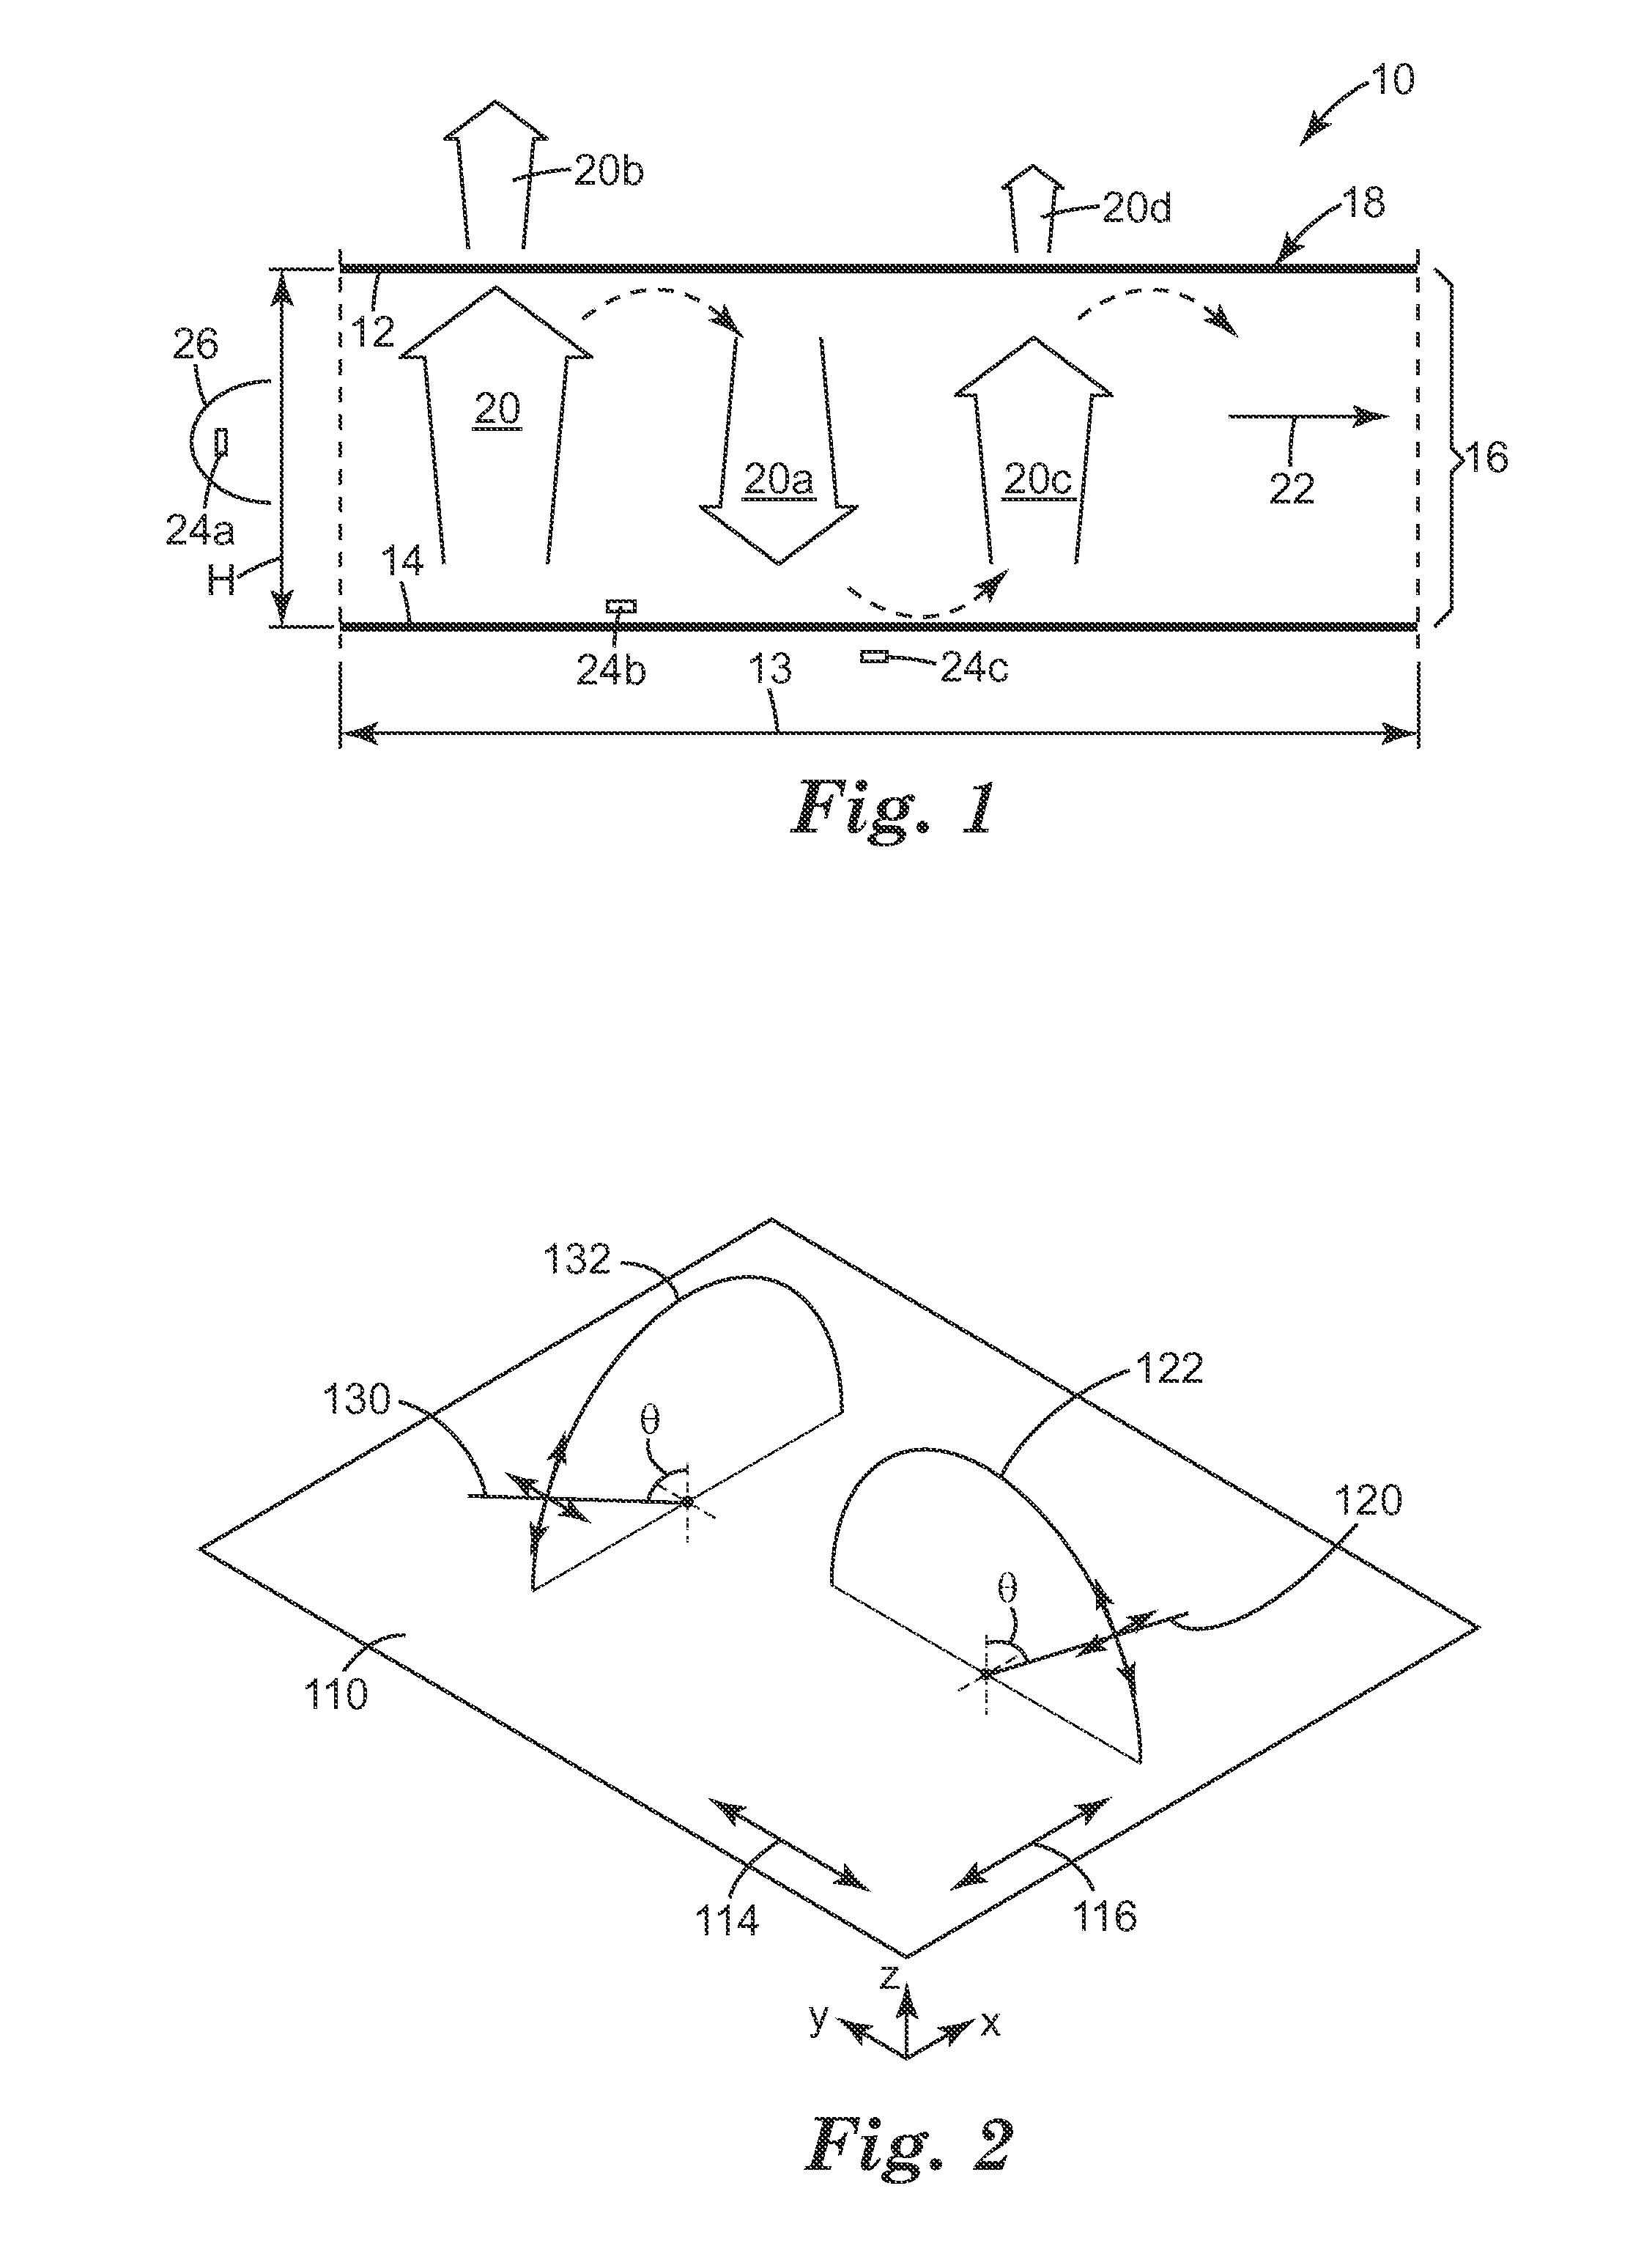 Illumination systems with sloped transmission spectrum front reflector